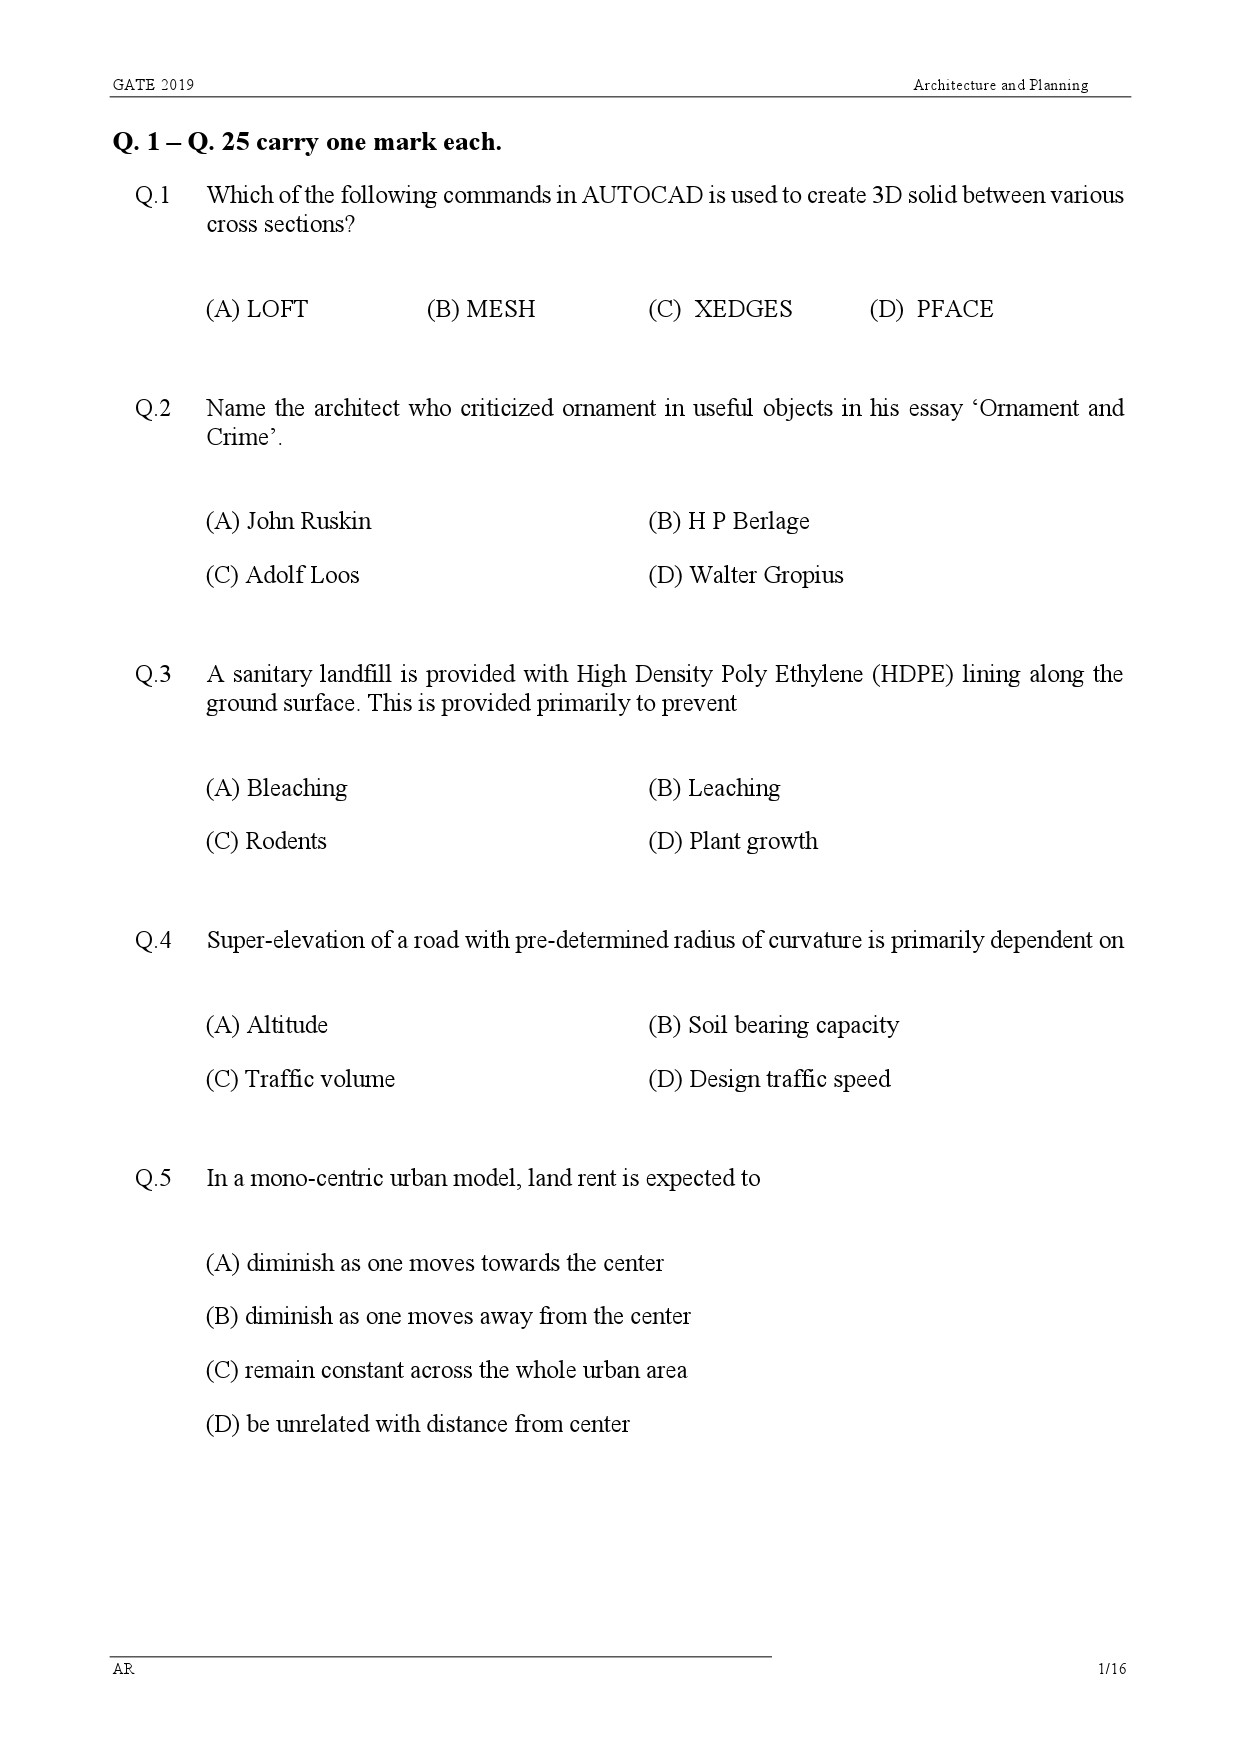 GATE Exam Question Paper 2019 Architecture and Planning 4